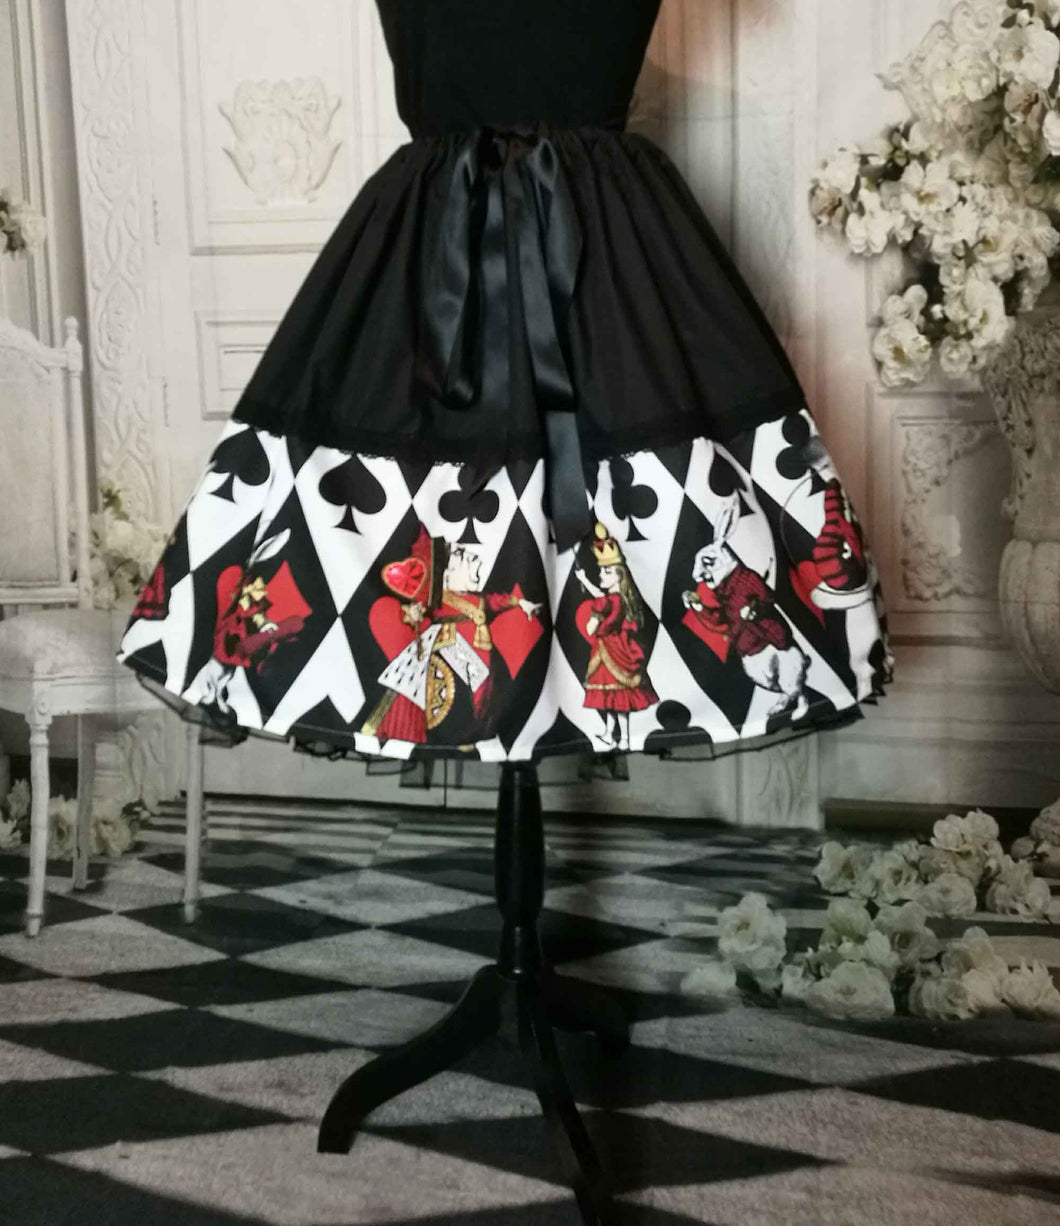 alice in wonderland full 50's style knee length skirt. Alice characters in black and white, red and gold. Adjustable waist up to 50 inches, suitable for plus sizes